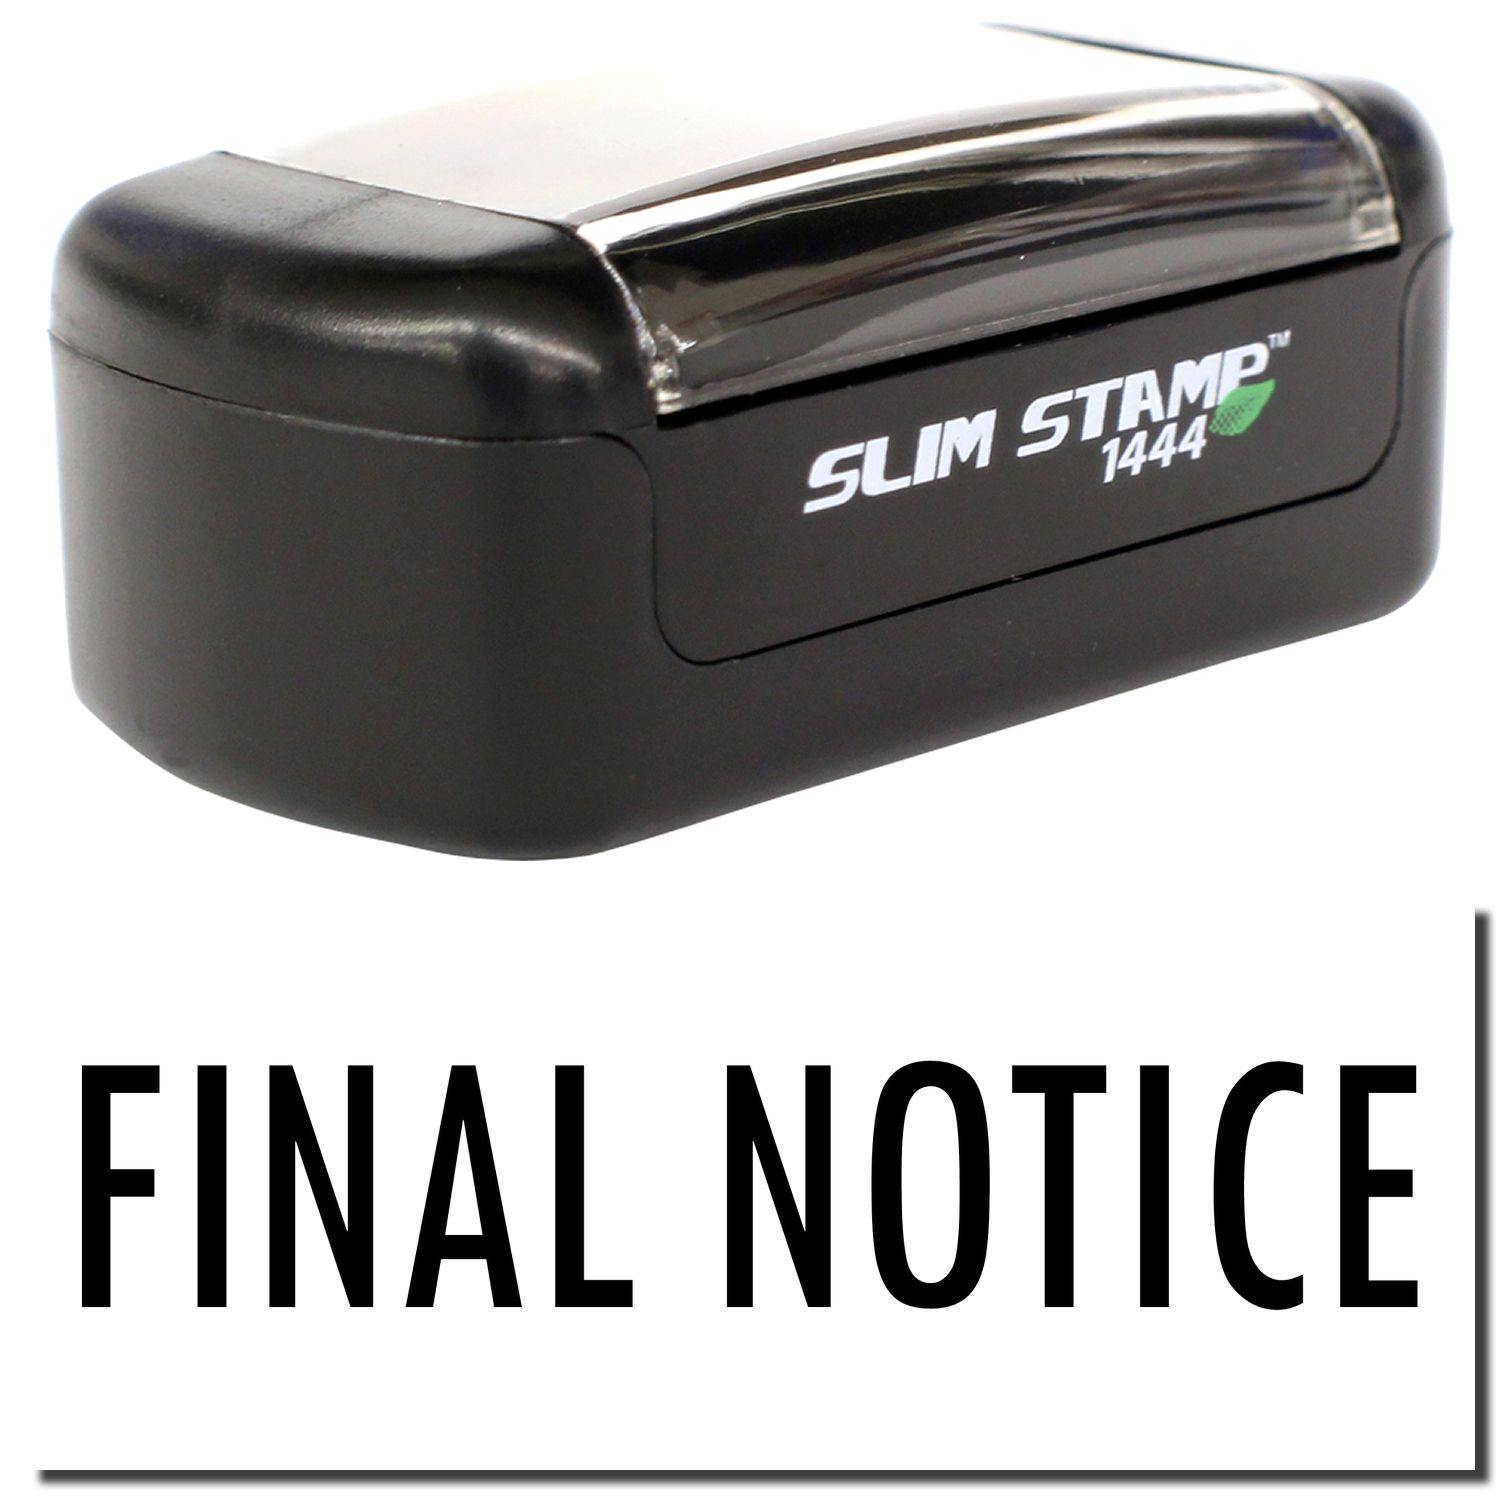 A stock office pre-inked stamp with a stamped image showing how the text "FINAL NOTICE" is displayed after stamping.